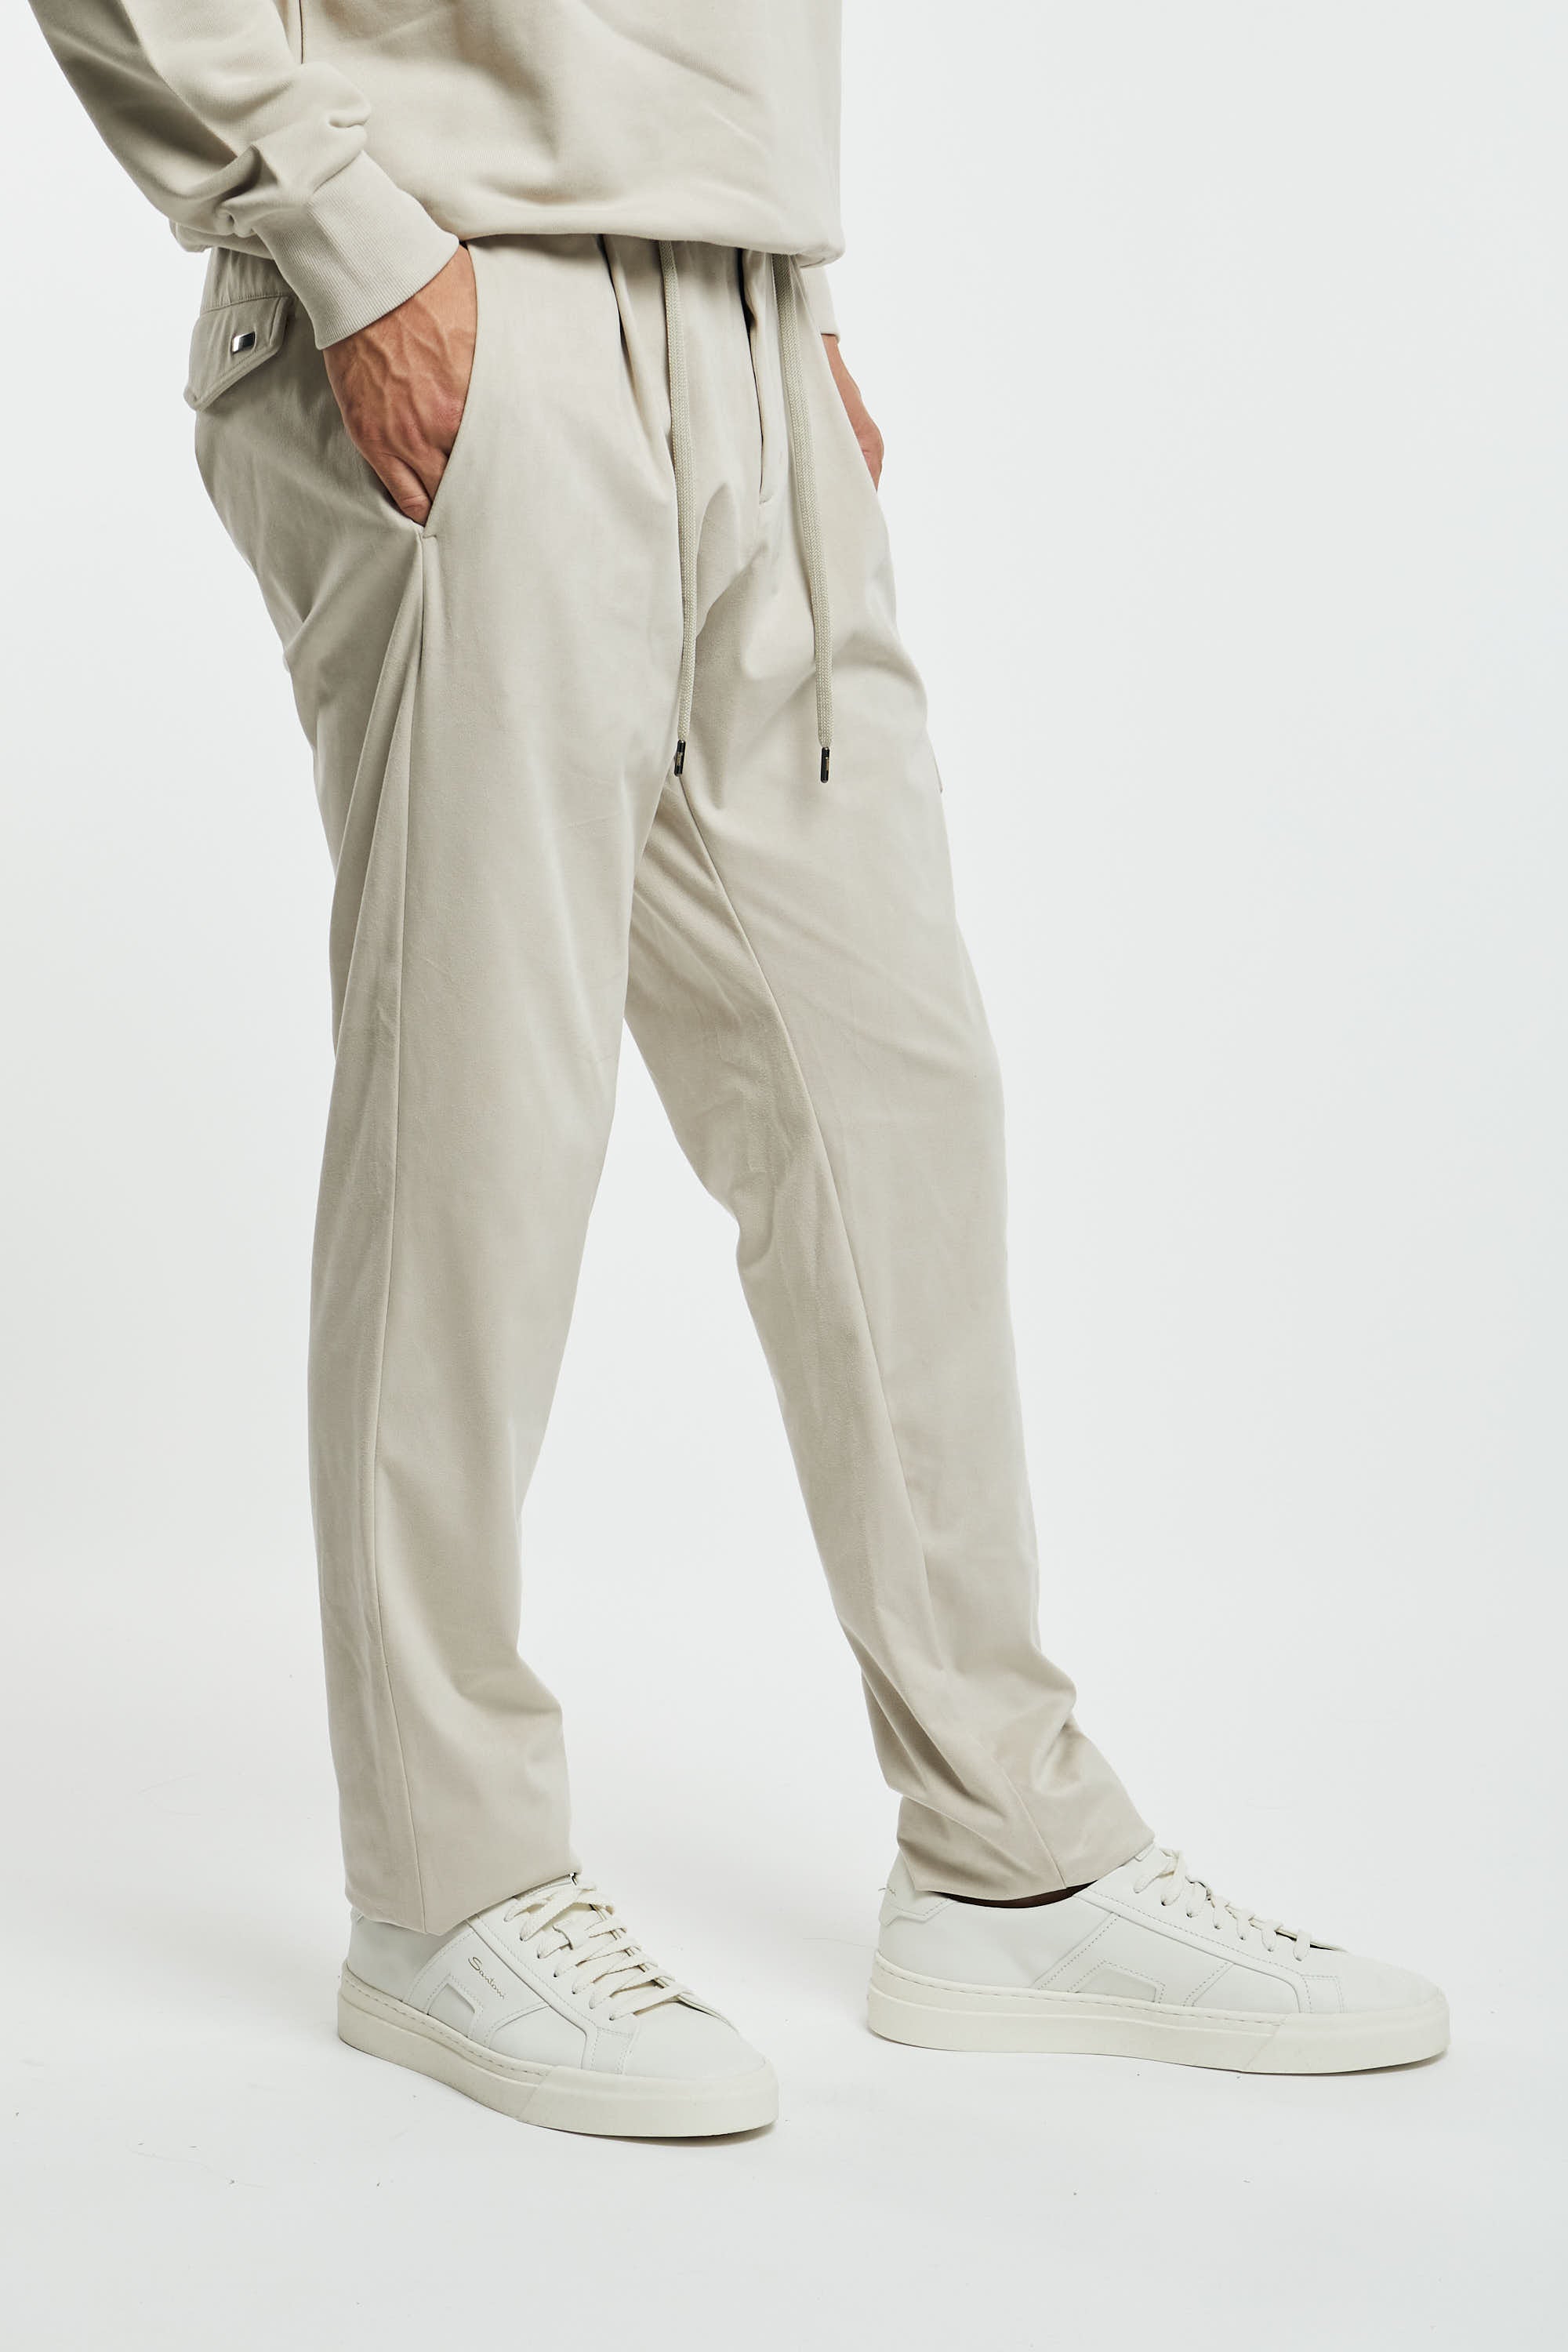 Herno Resort Trousers in Suede Microfiber Ice-4